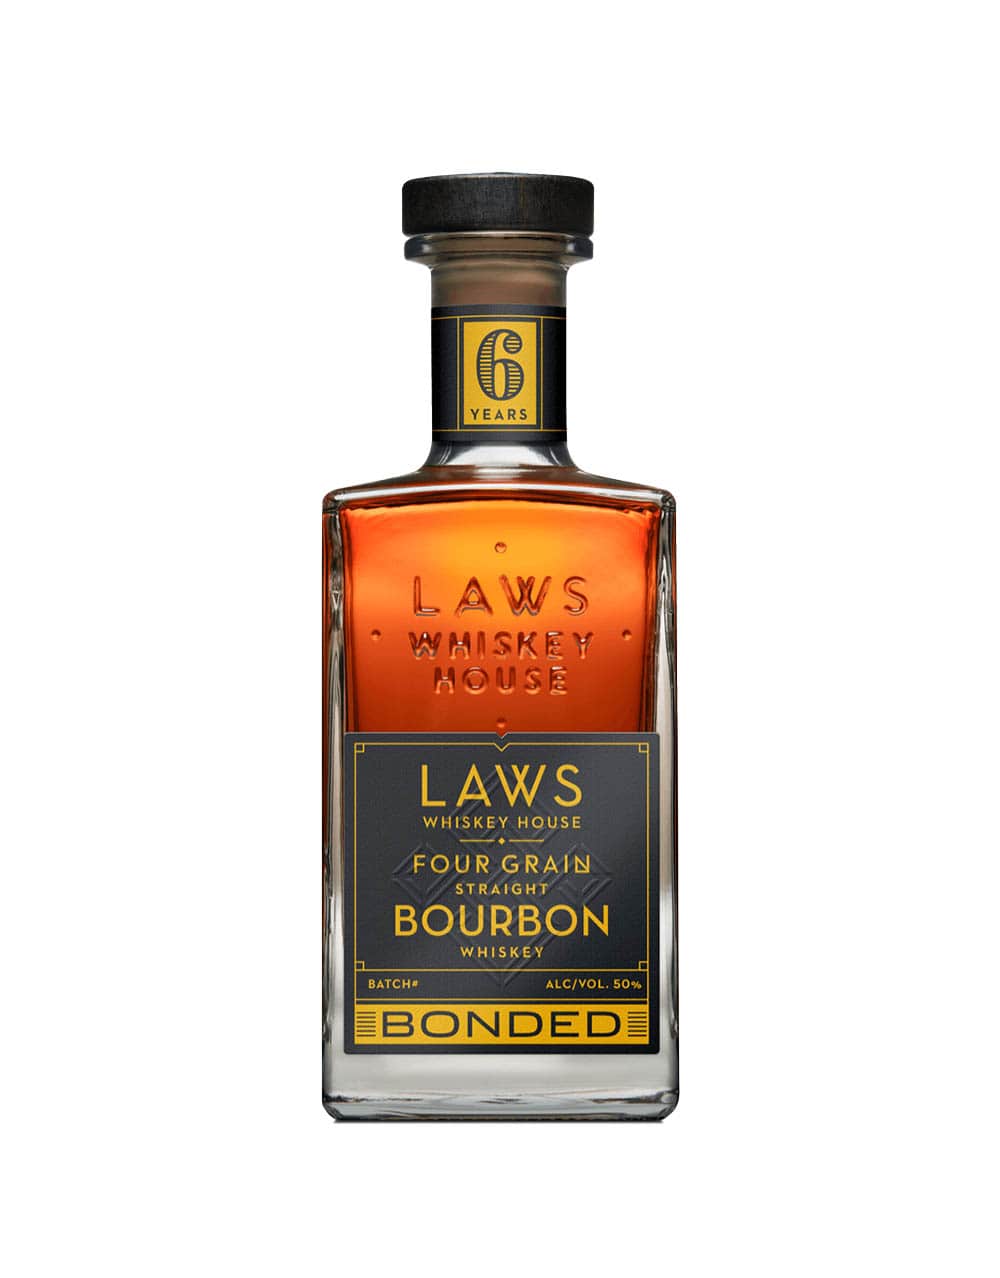 Laws Four Grain Bonded 6 Years old Straight Bourbon Whiskey